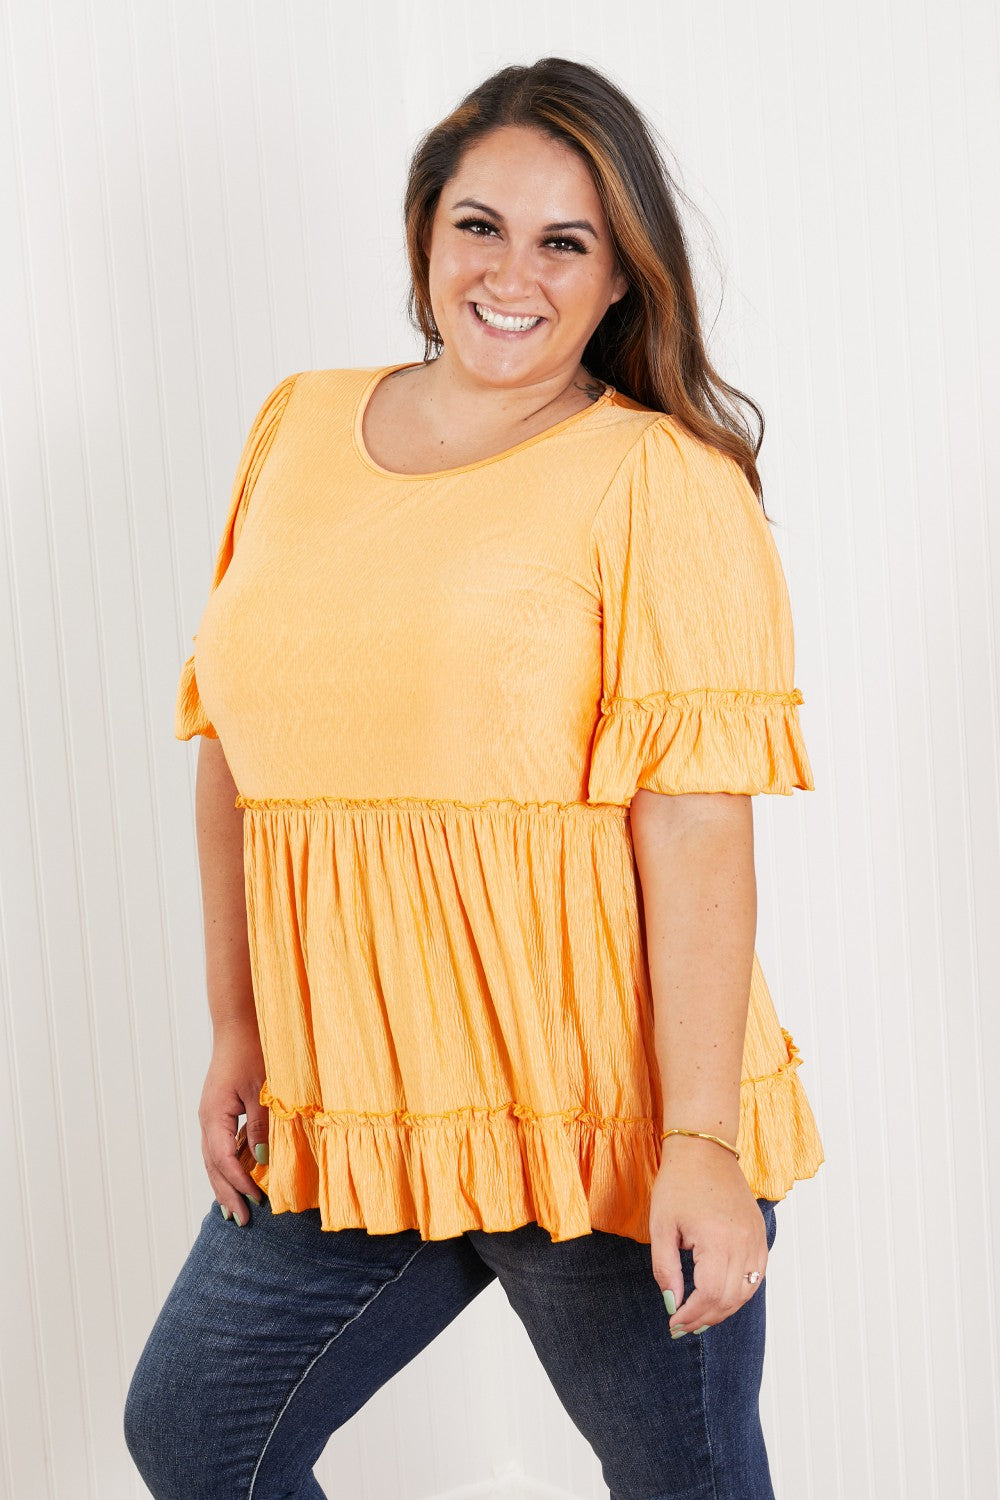 Hailey & Co Our Song Full Size Ruffled Babydoll Top